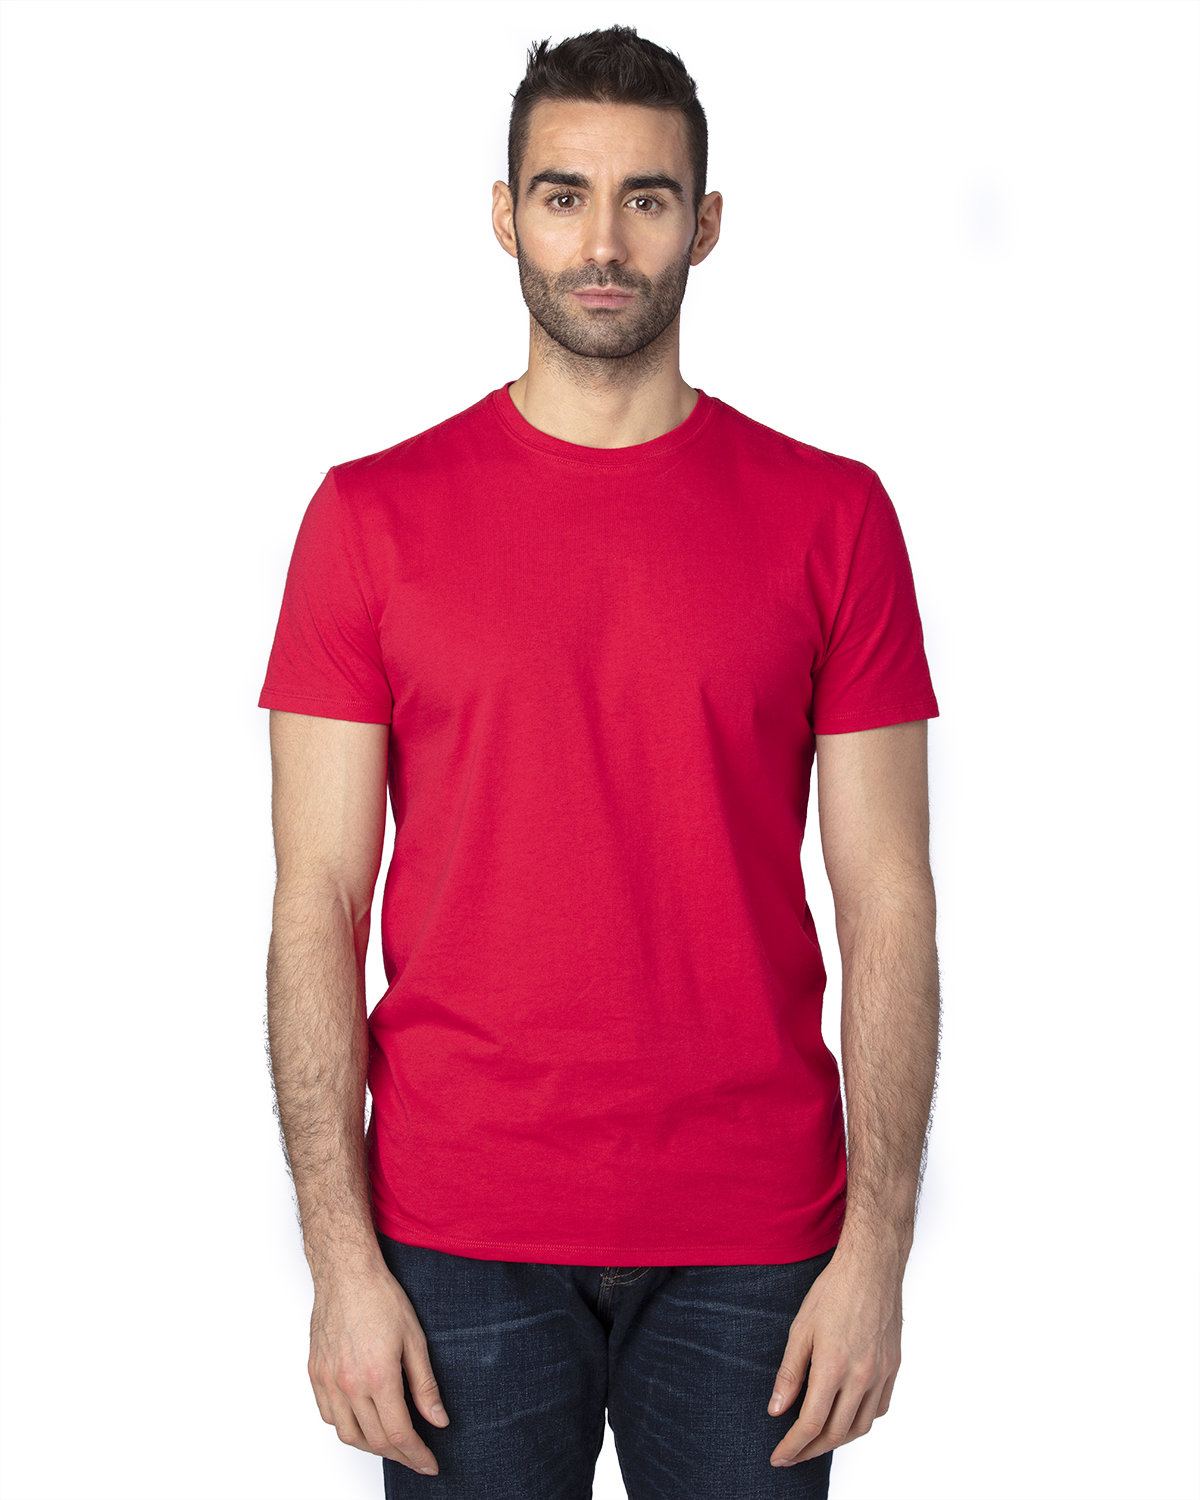 Buy High Frequency Apparel T-Shirts Online